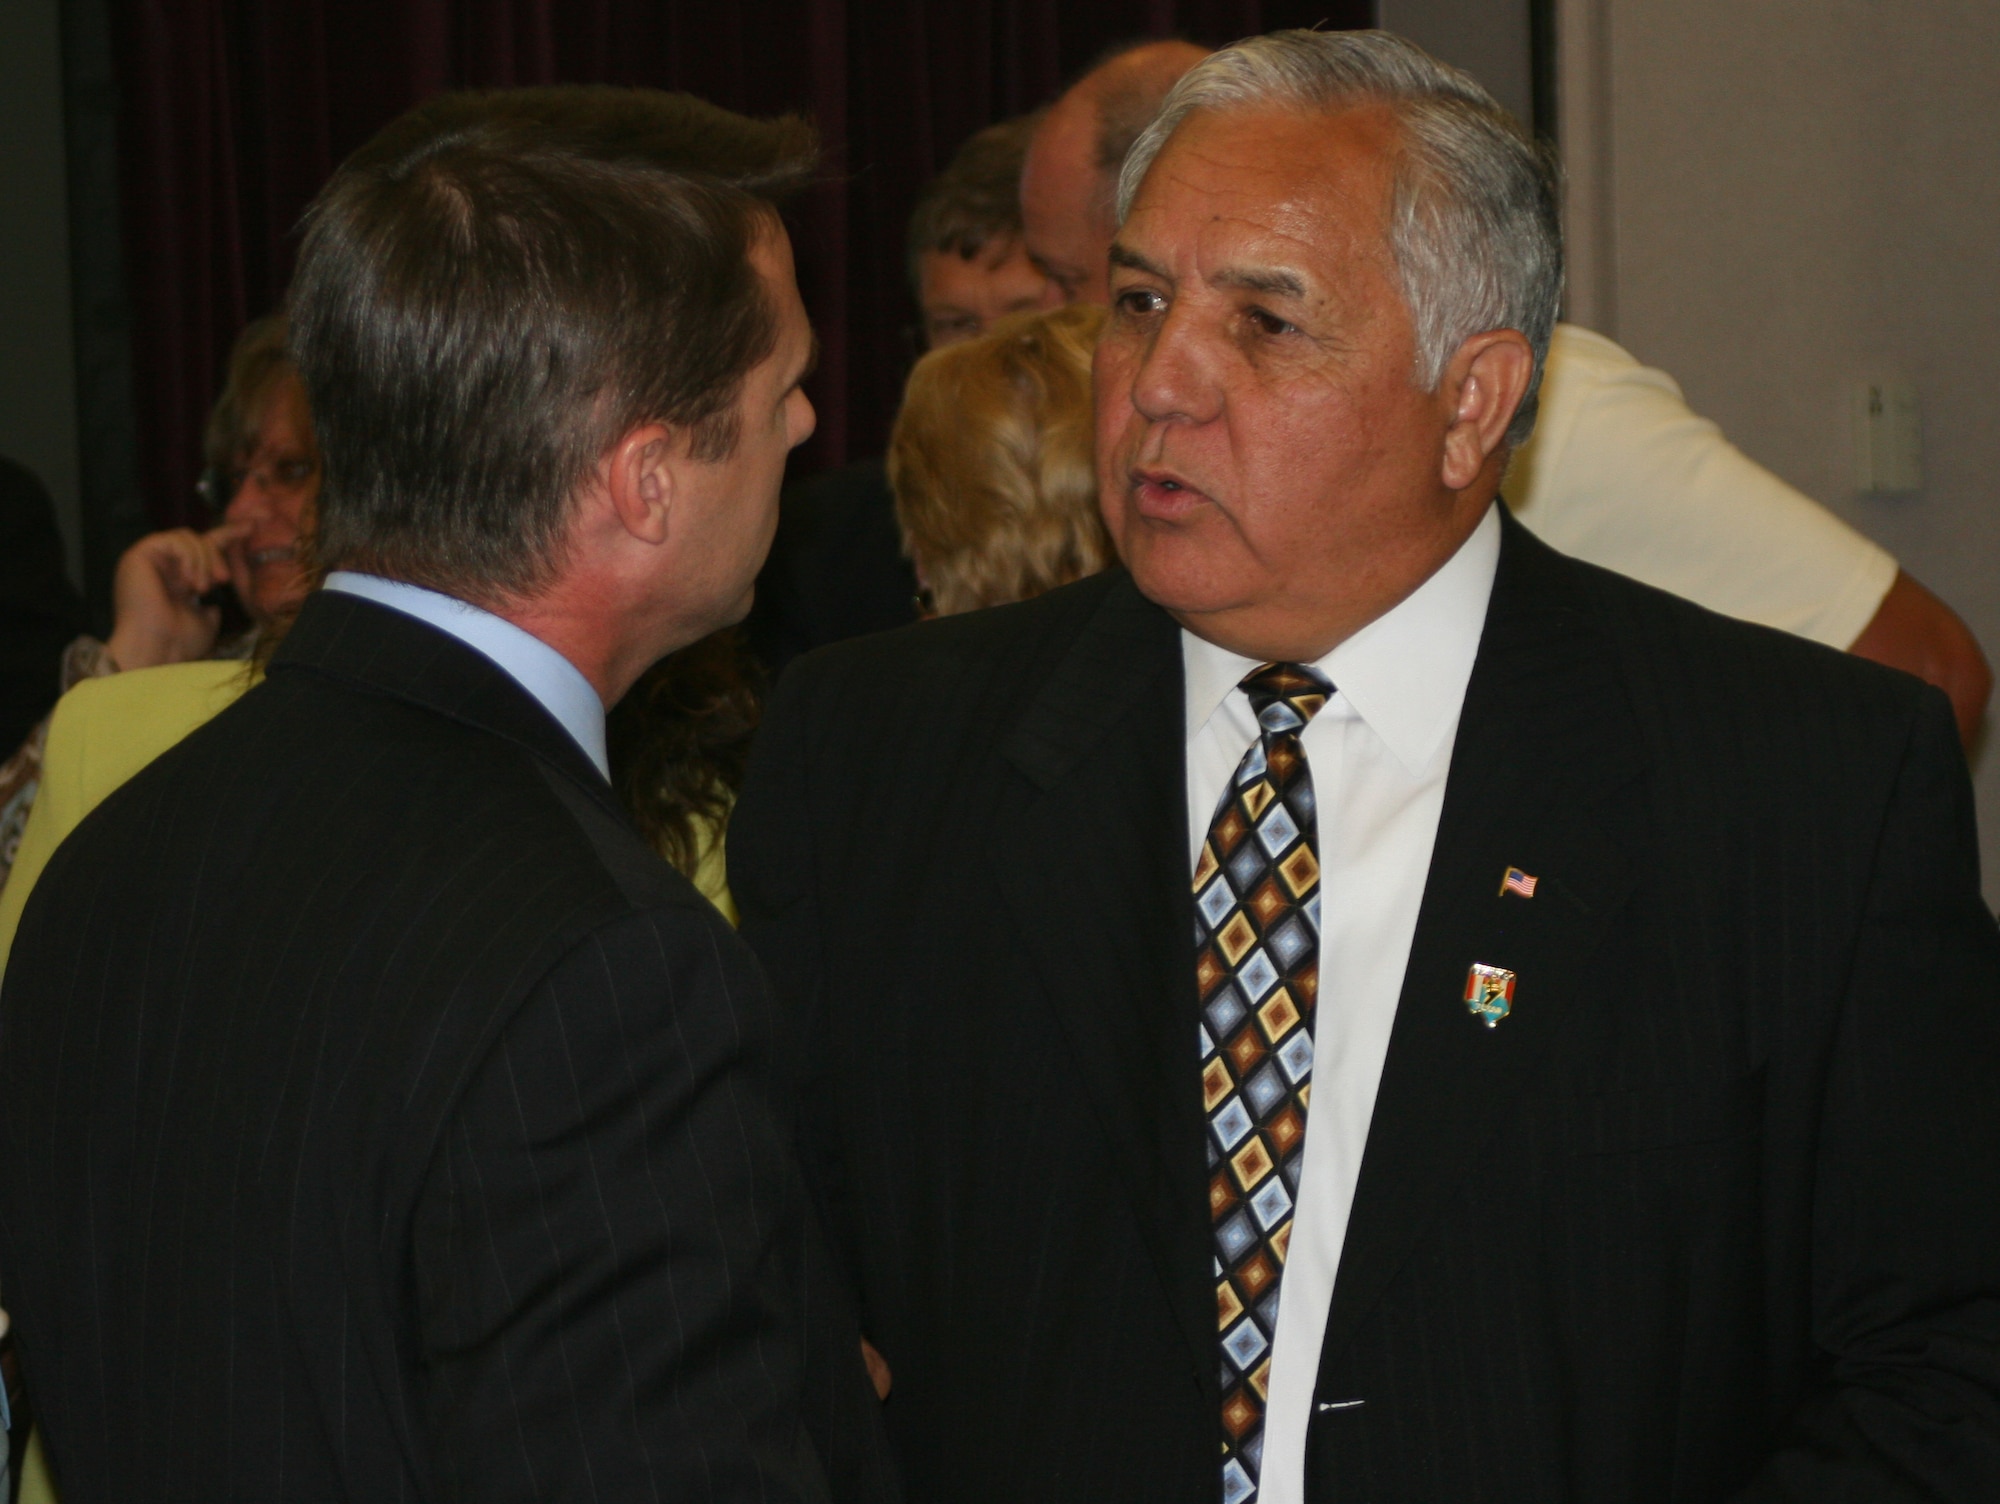 Congressman Silvestre Reyes, who represents the 16th District of Texas in the U.S. House of Representatives, talks to Todd Smith of Warrensburg, Mo., during a base community council luncheon at Mission’s End May 29. As a senior member of both the Armed Services and Select Intelligence Committees, Congressman Reyes is a key member of Congress on defense and military issues.  He attended the luncheon with Missouri Congressman Ike Skelton, and U.S. Navy Rear Admiral Mark Ferguson, Navy legislative affairs chief. Congressman Reyes, who served in the U.S. Army and is a Vietnam War veteran, thanked Whiteman members for their service and patriotism.(U.S. Air Force photo/Staff Sgt. Rob Hazelett)